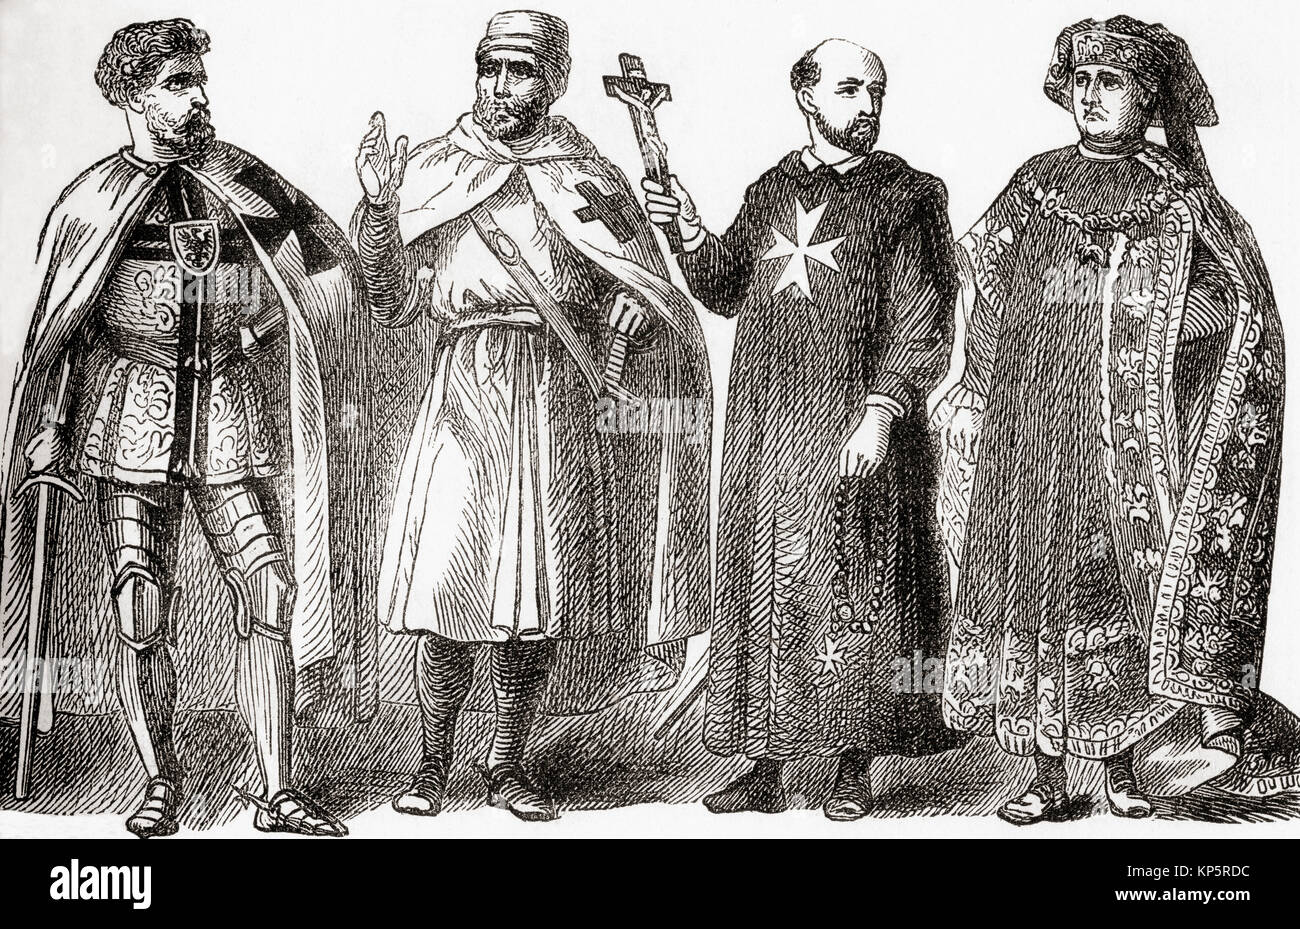 From left to right, Teutonic knight, Templar, Knight of St. John and of The Order of The Golden Fleece.  From Ward and Lock's Illustrated History of the World, published c.1882. Stock Photo